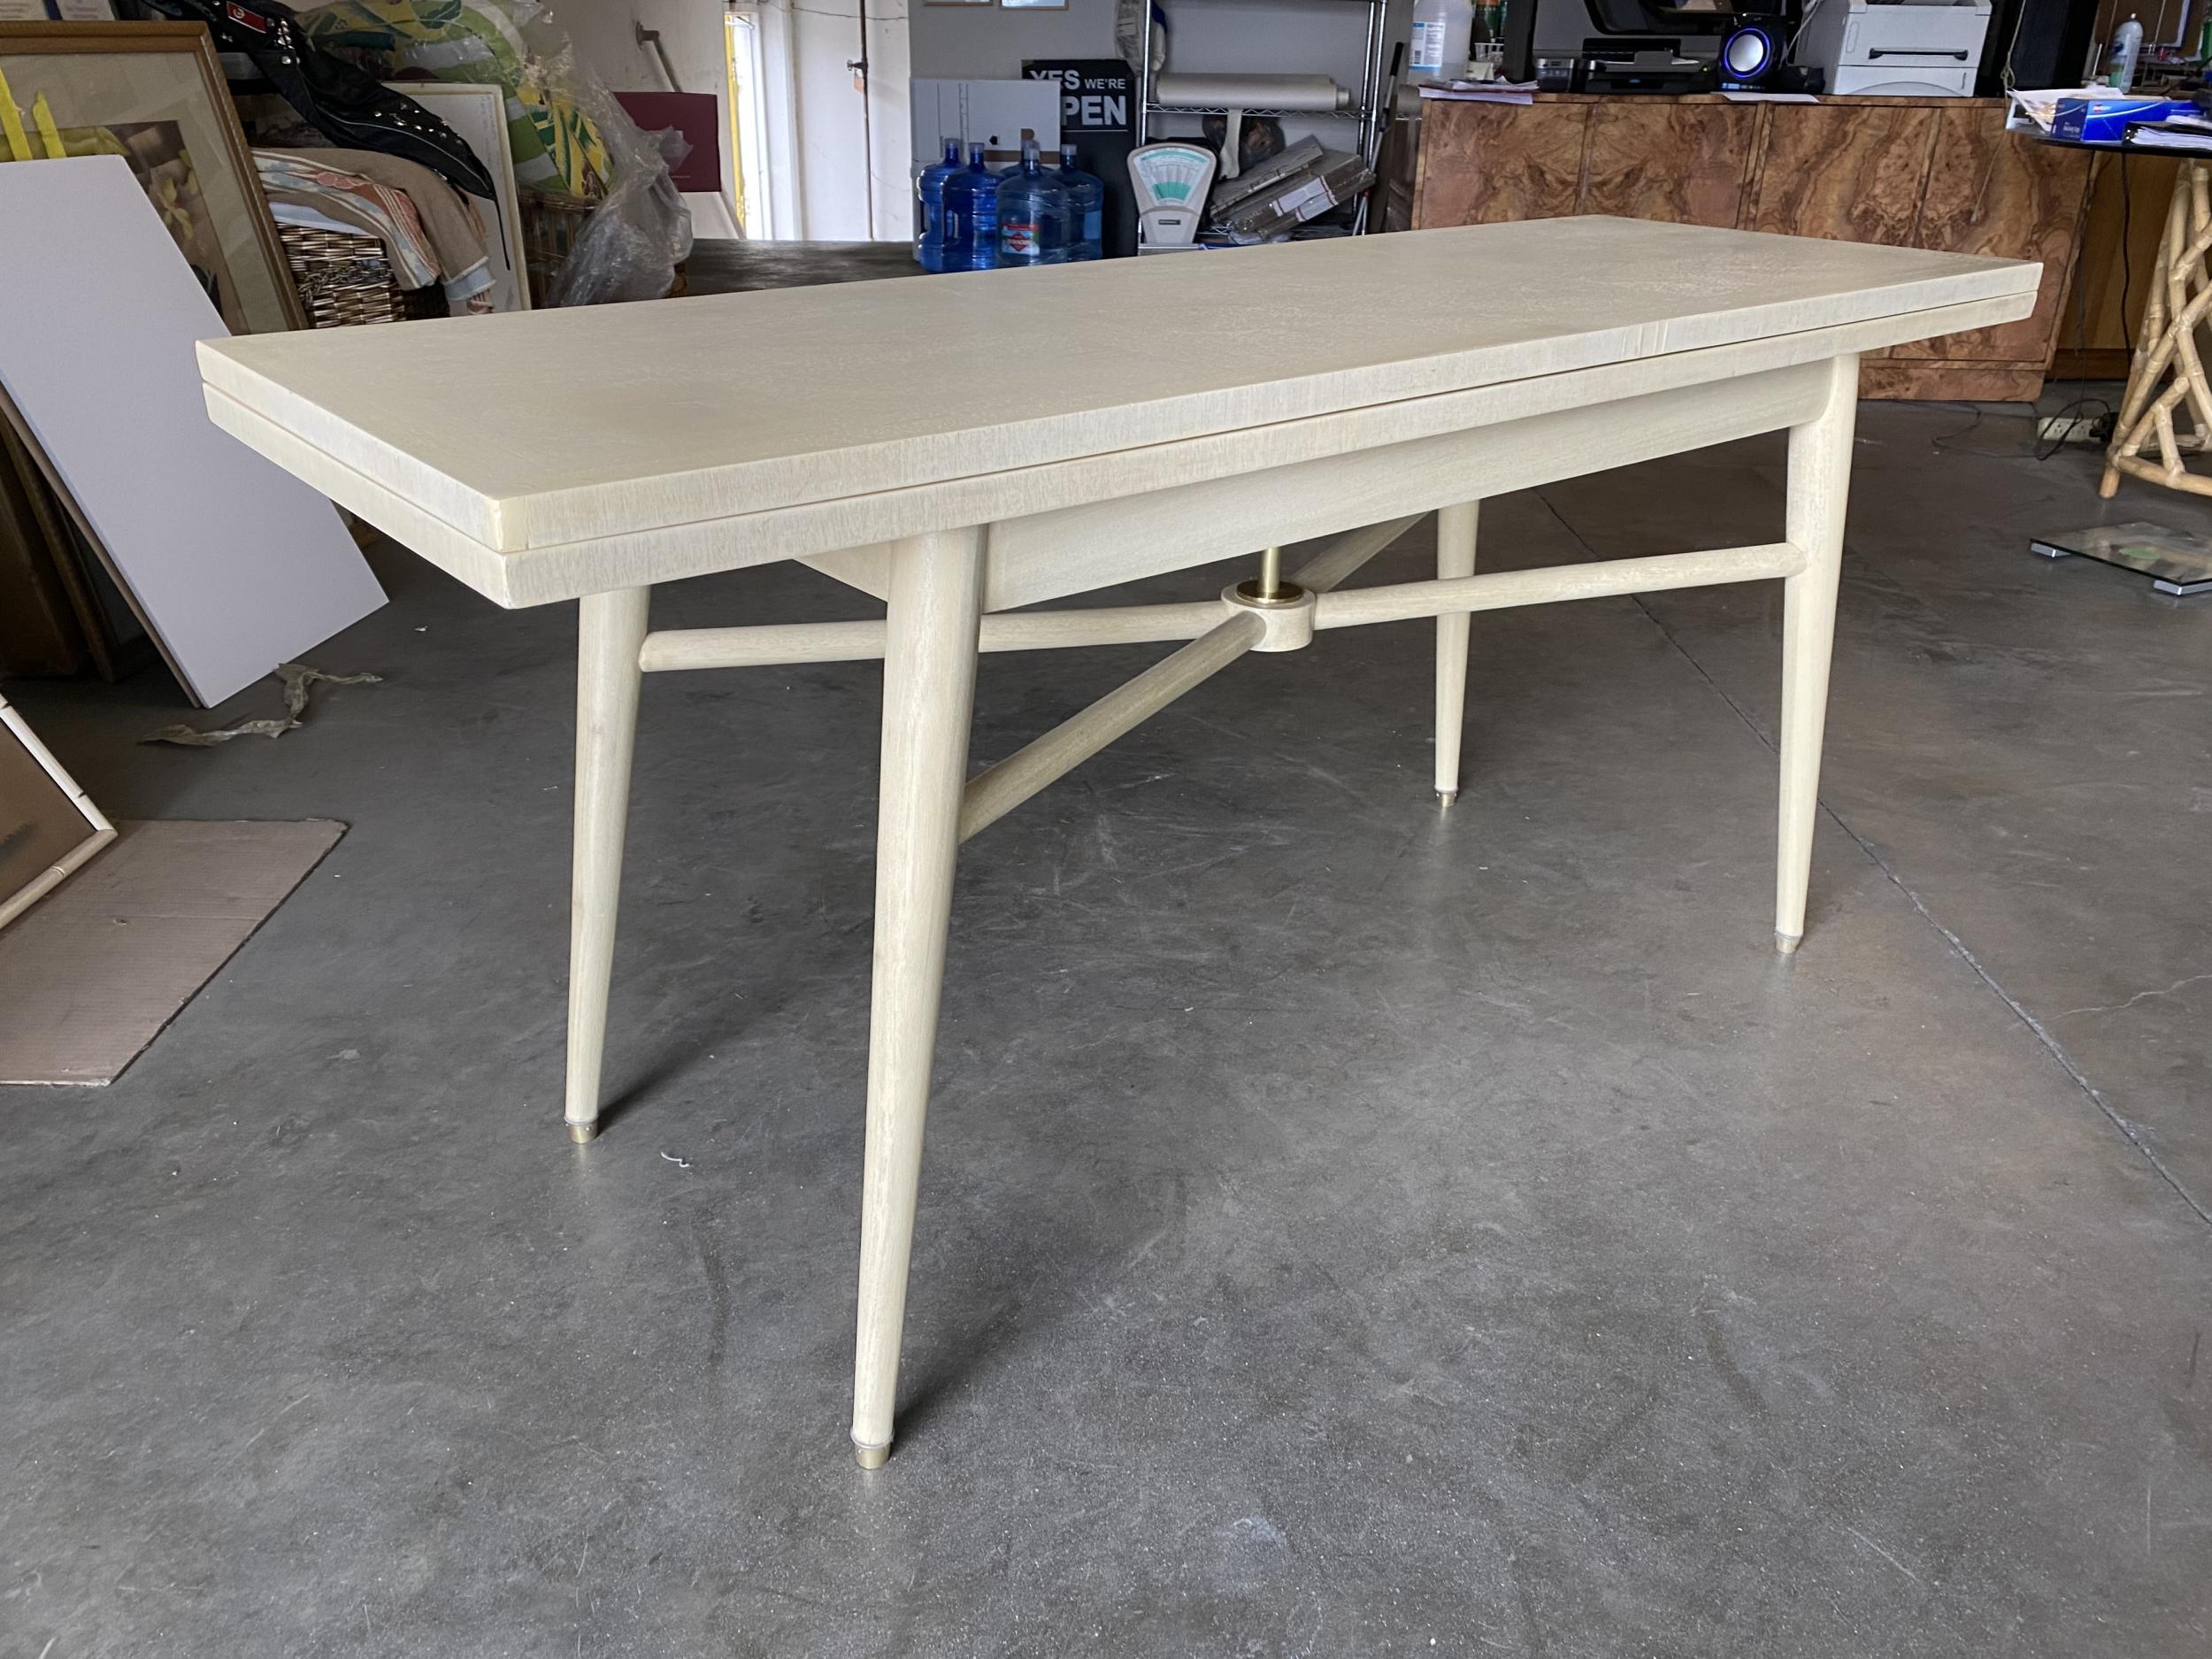 Rare Mid-Century Modern flip top long convertible console table which flips open to 6 person dining table. The table features tapered legs with brass accents and X design between the legs. 

The table is 20